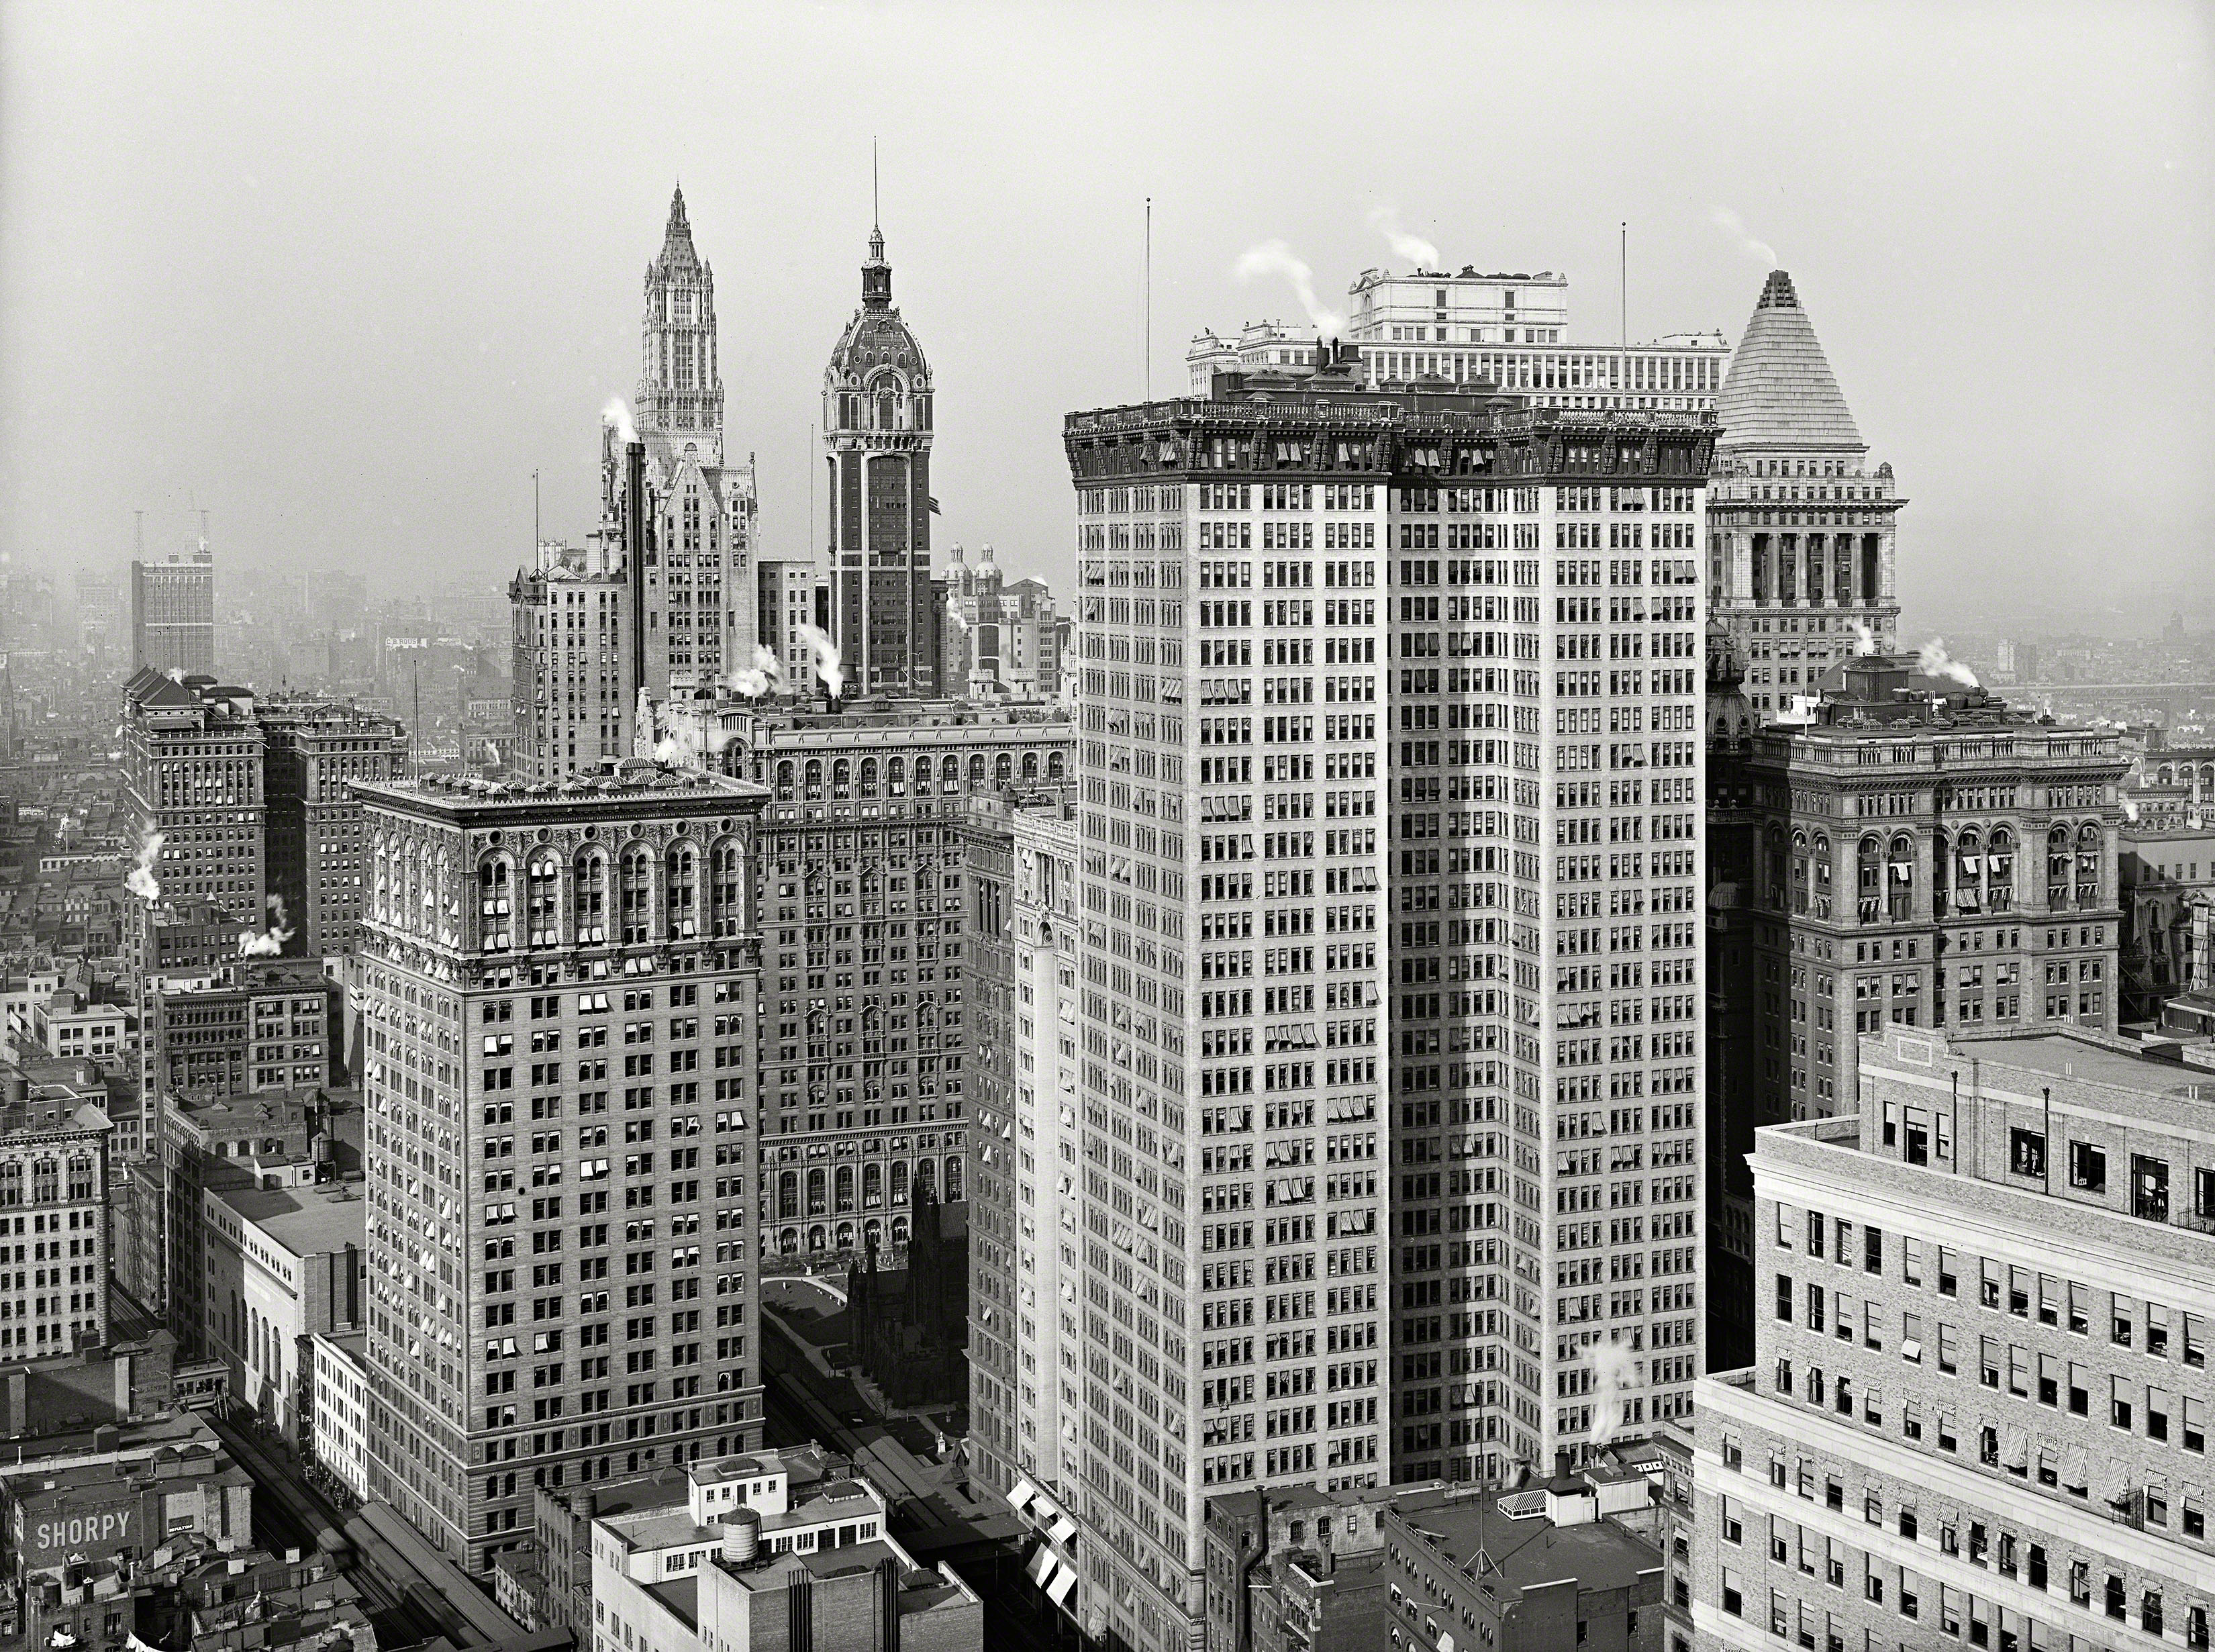 New York circa 1917. "Skyscrapers, looking north toward towers of Woolworth and Singer buildings." Double-barreled tower in the foreground is the Adams Express Building. 5x7 inch glass negative, Detroit Publishing Co. View full size.